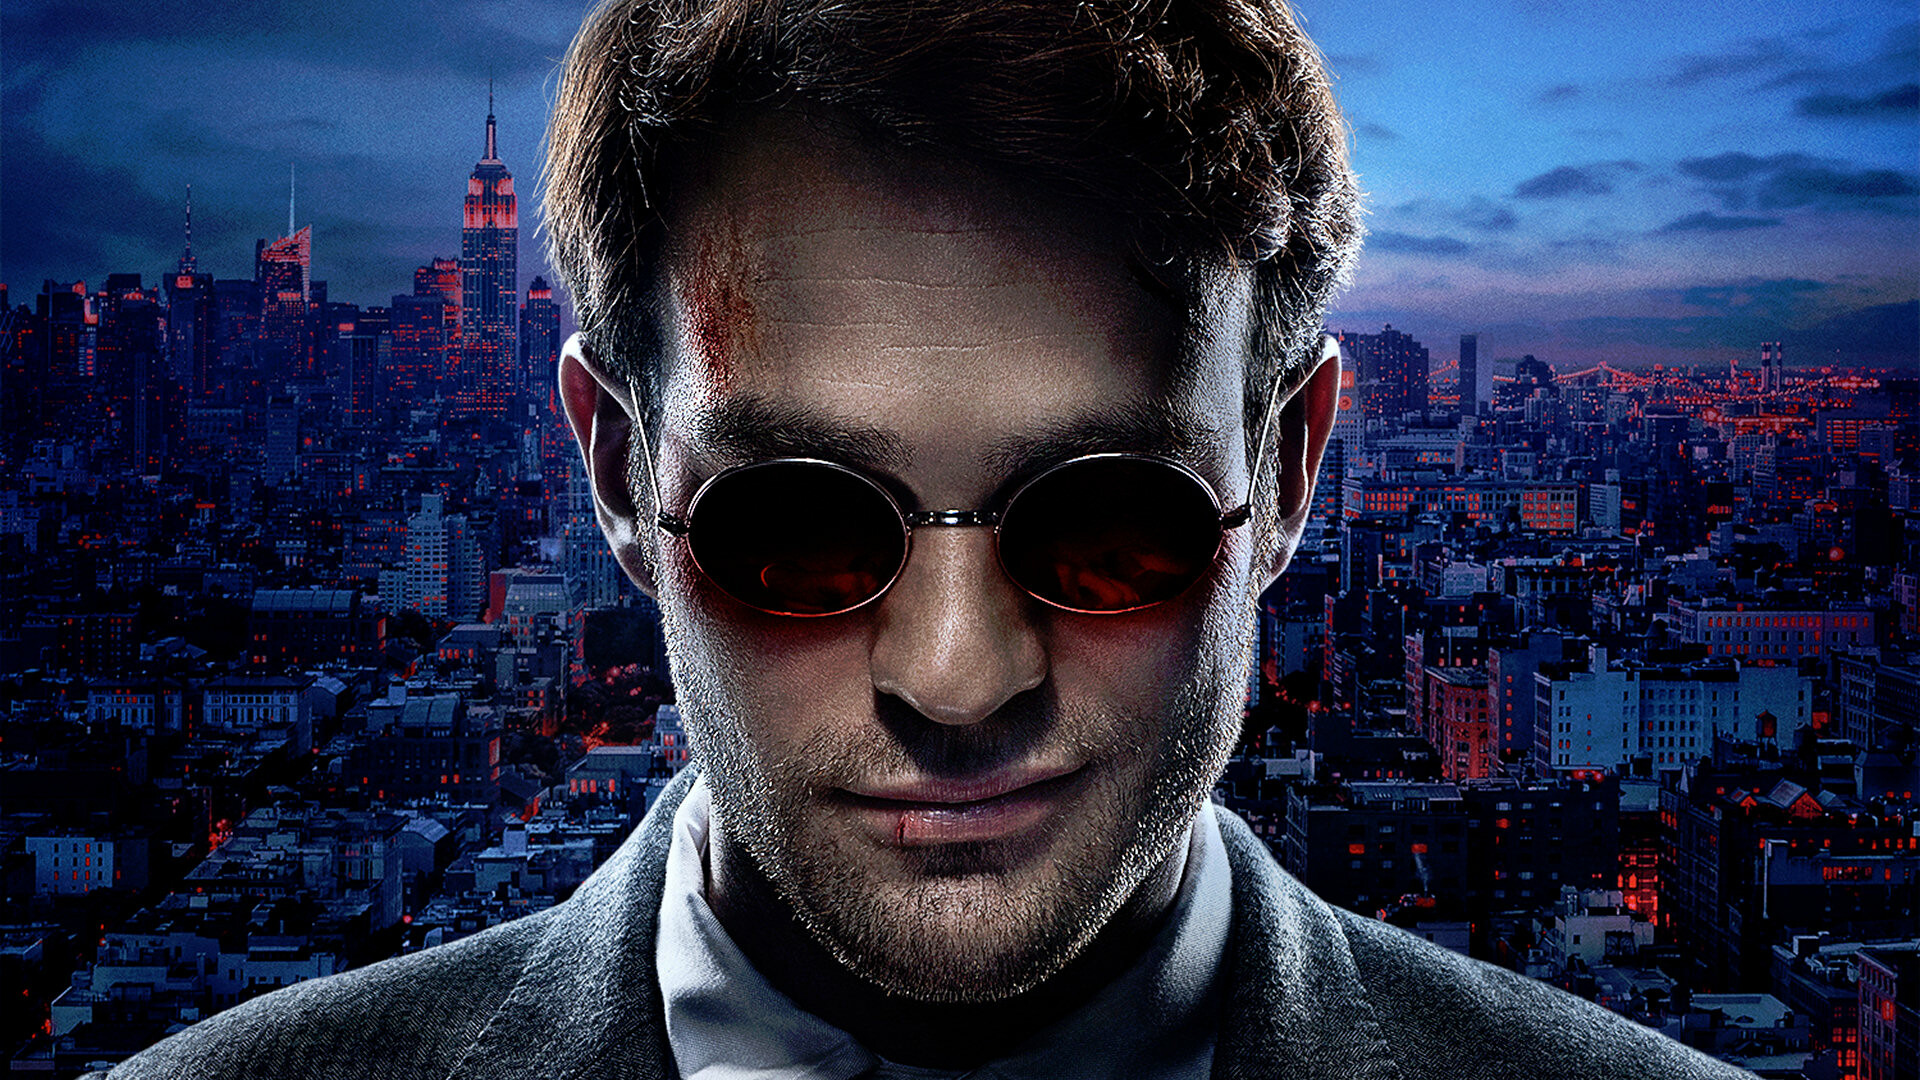 Daredevil (TV Series): The first Marvel produced TV show to be considered as canon in the Marvel Cinematic Universe. 1920x1080 Full HD Background.